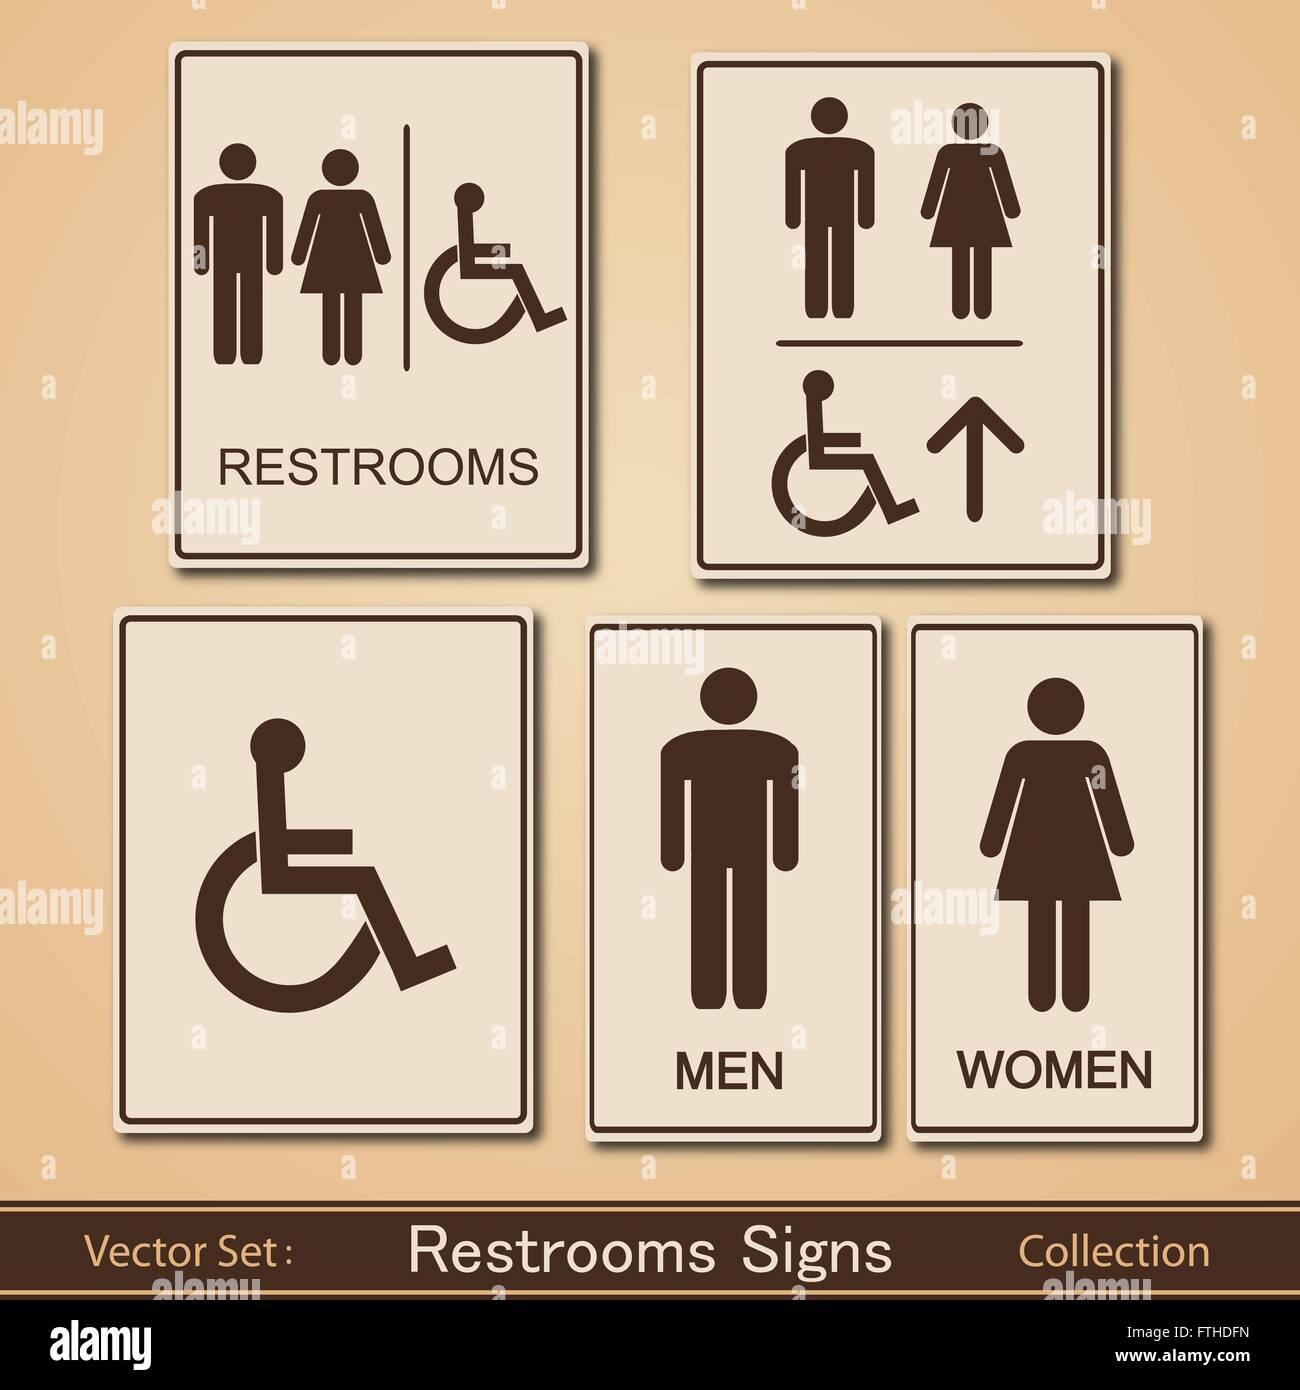 Restroom Signs Vector Collection Stock Vector